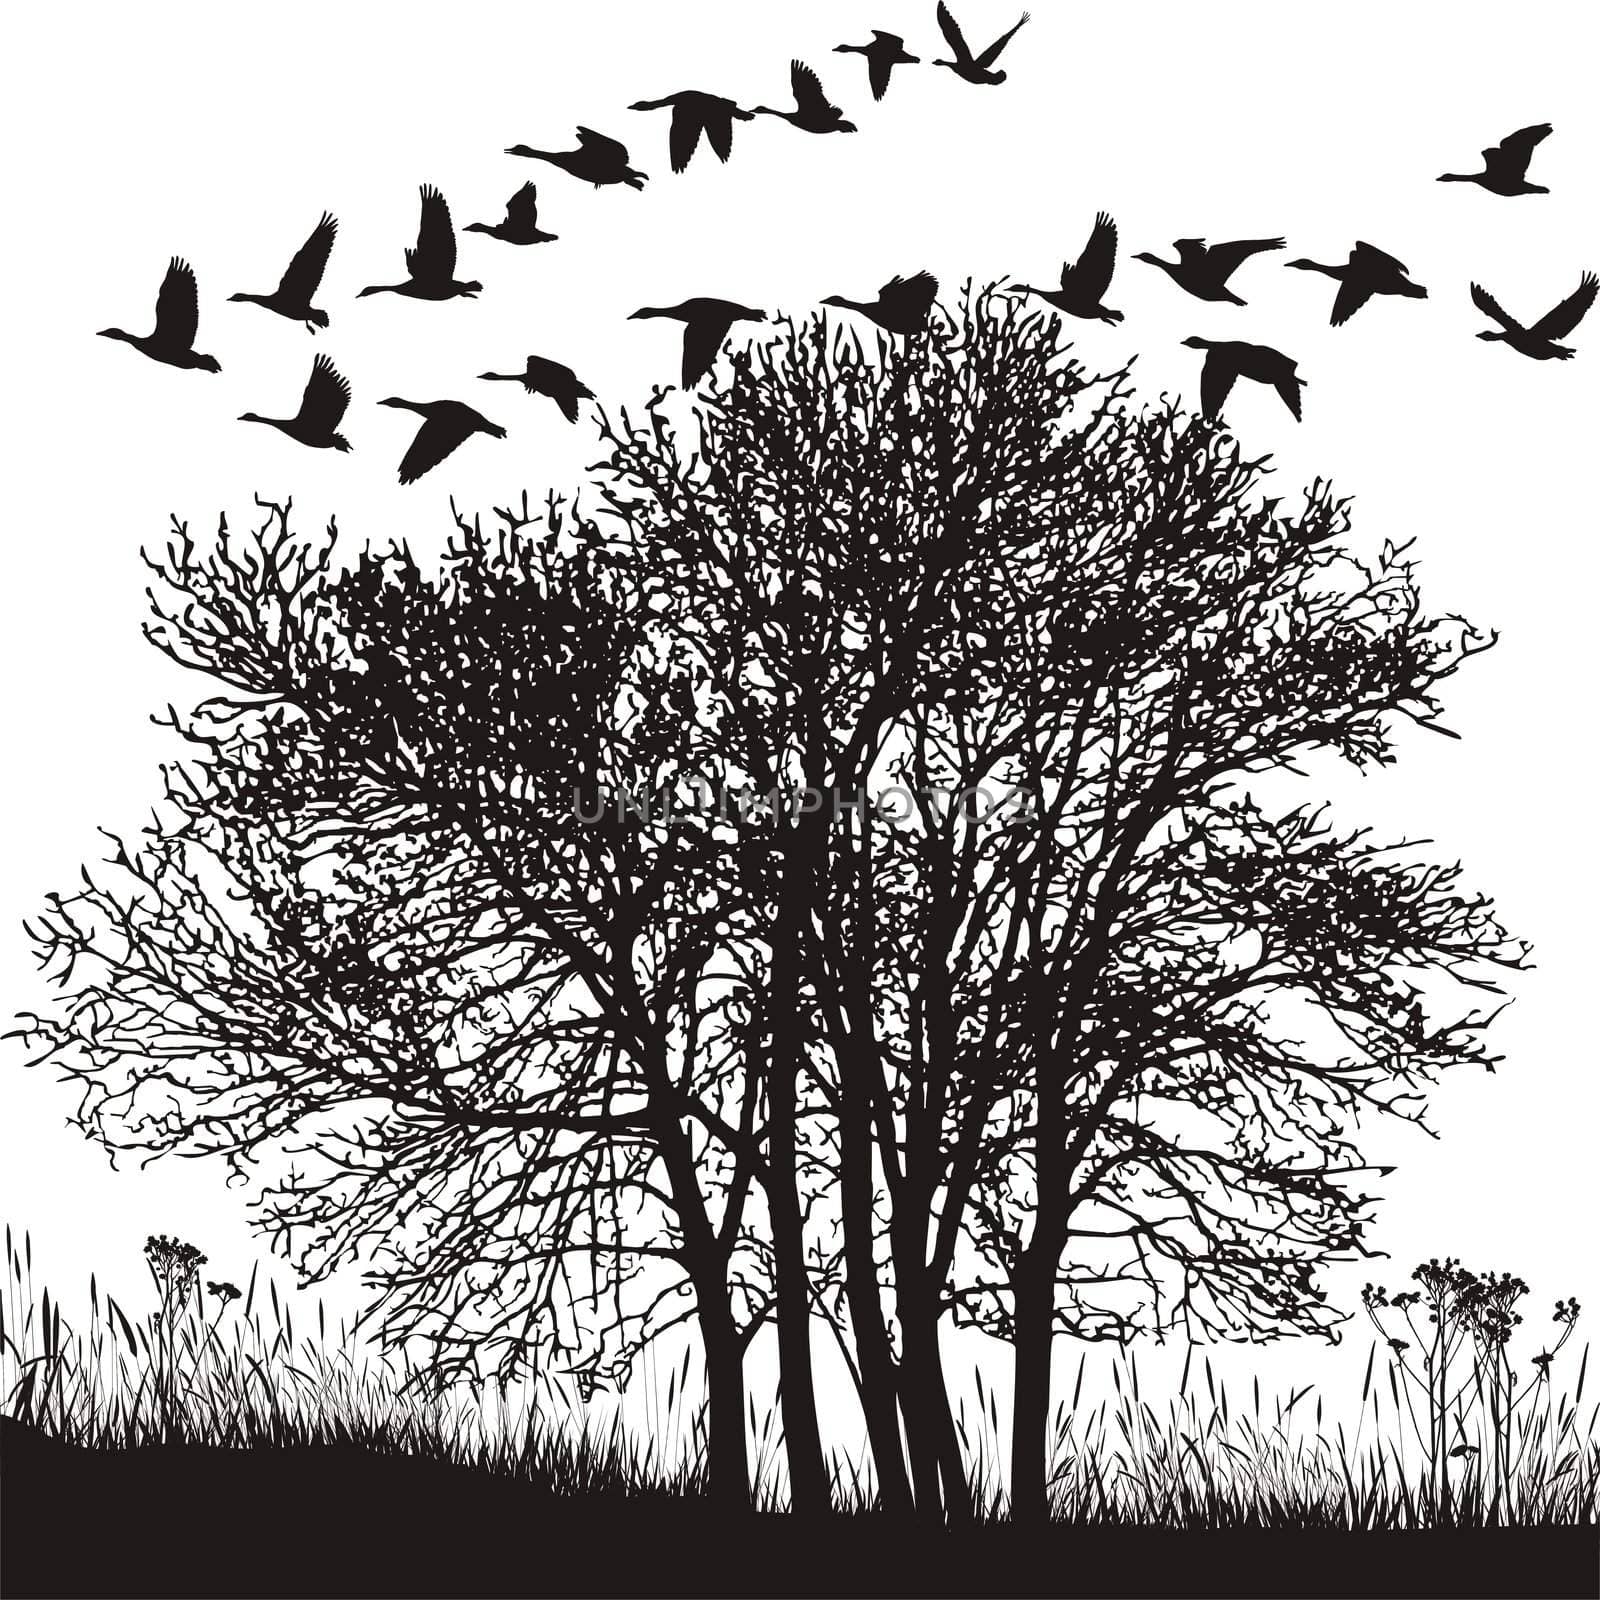 illustration of autumnal mood with a group of trees and wild geese